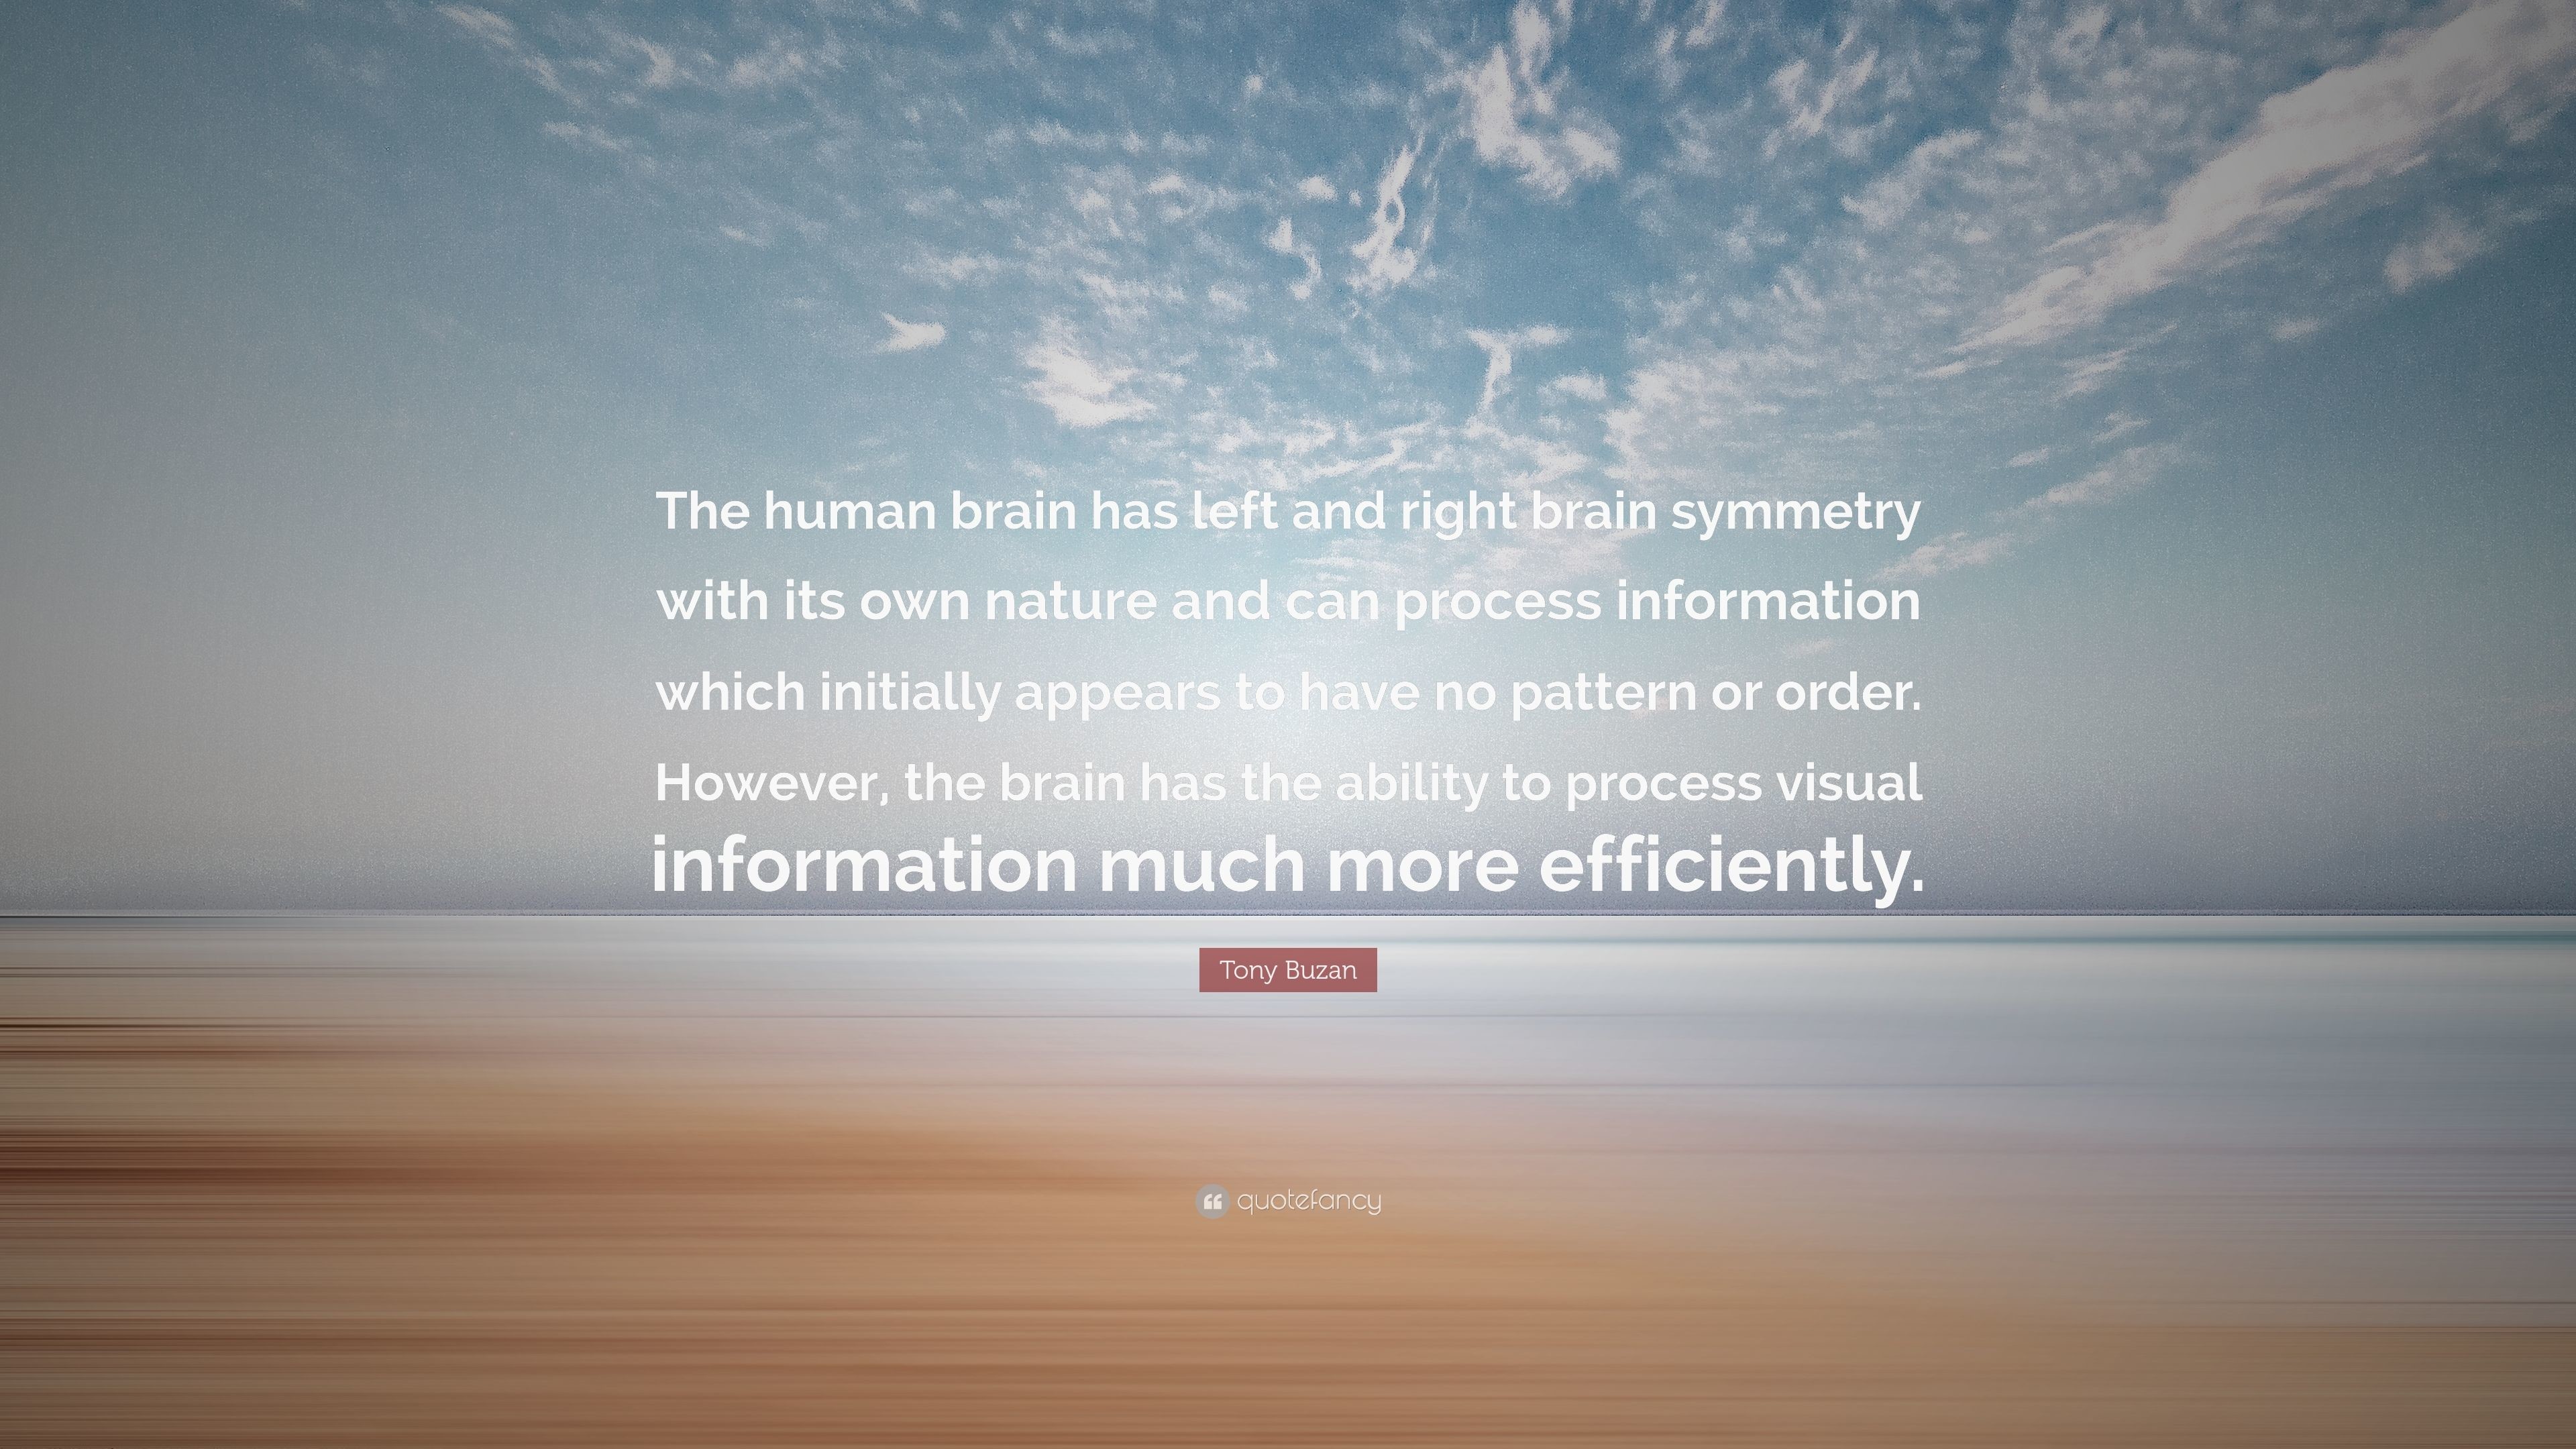 3840x2160 Tony Buzan Quote: “The human brain has left and right brain symmetry with  its